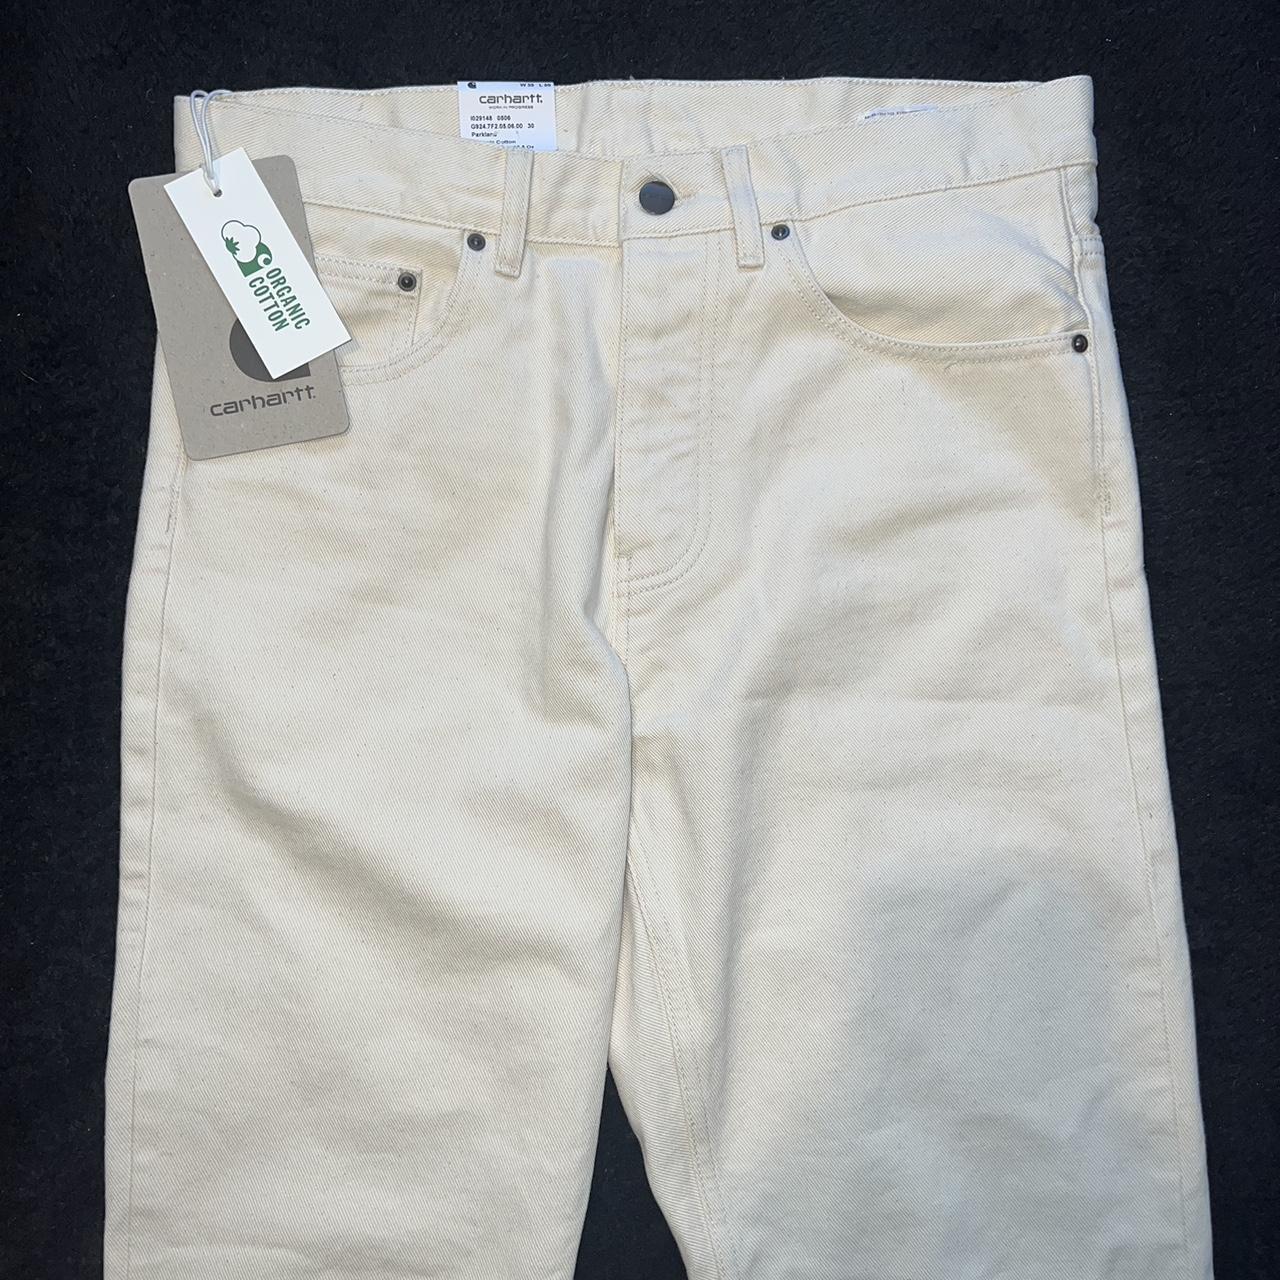 Carhartt stone washed newel pant Brand new with... - Depop